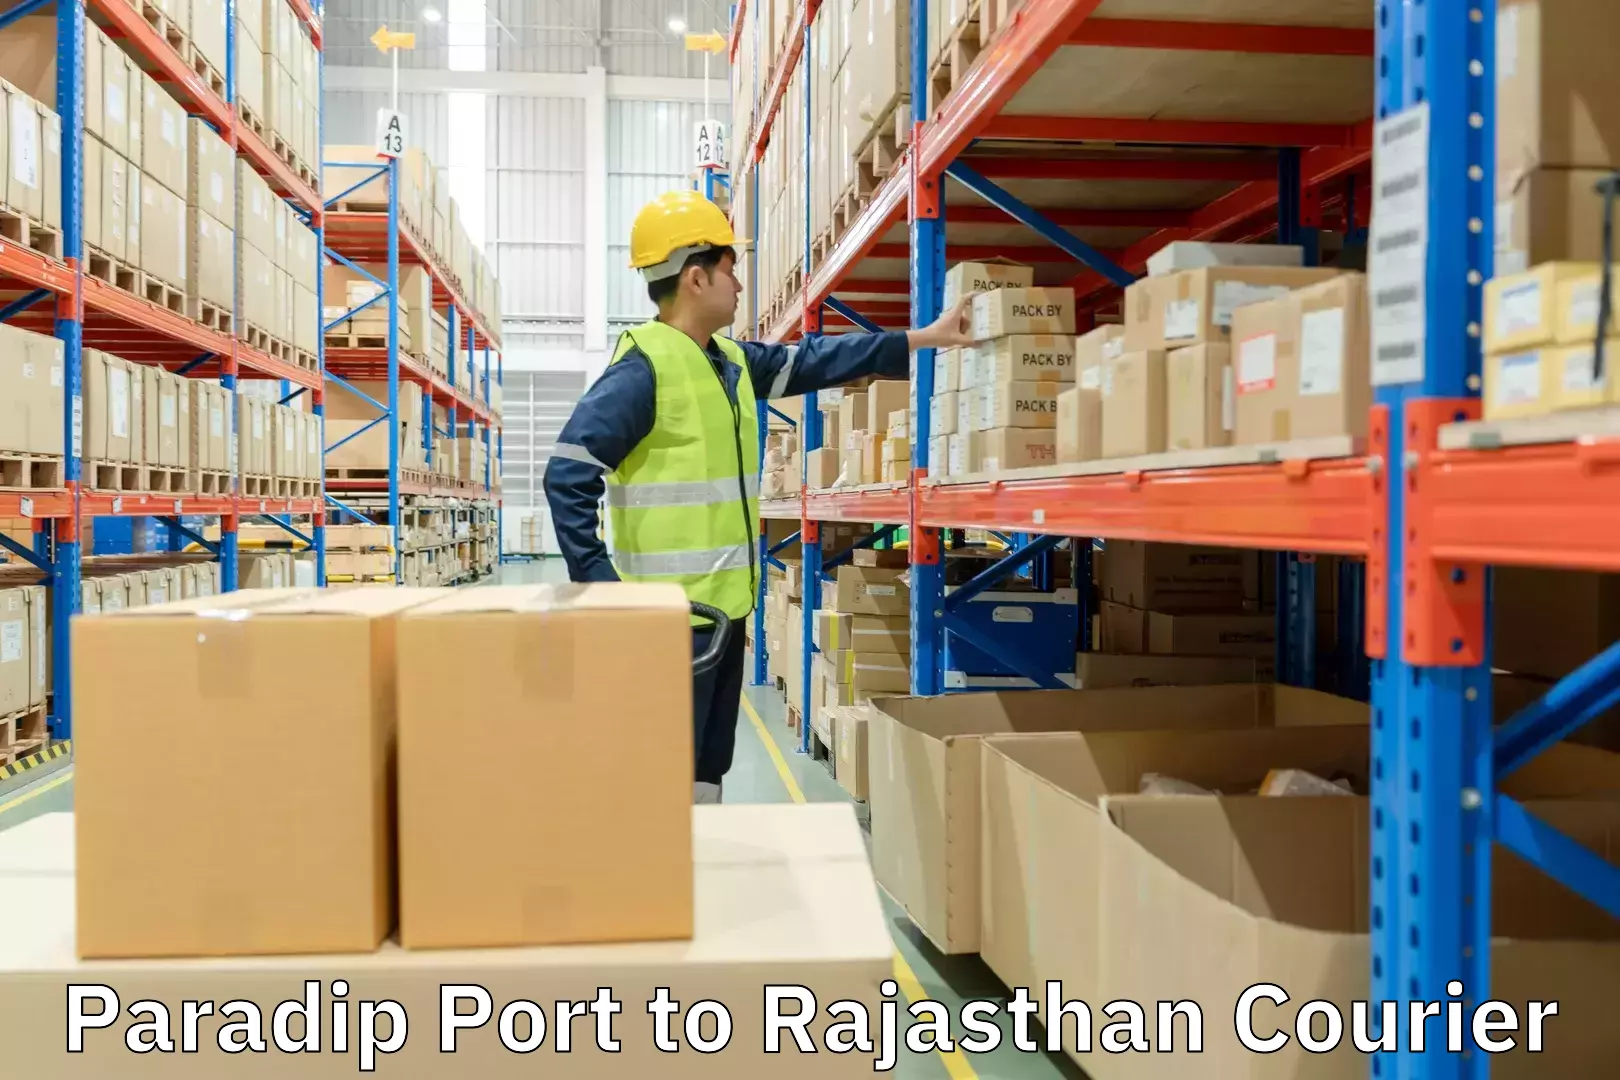 Nationwide courier service Paradip Port to Rajasthan